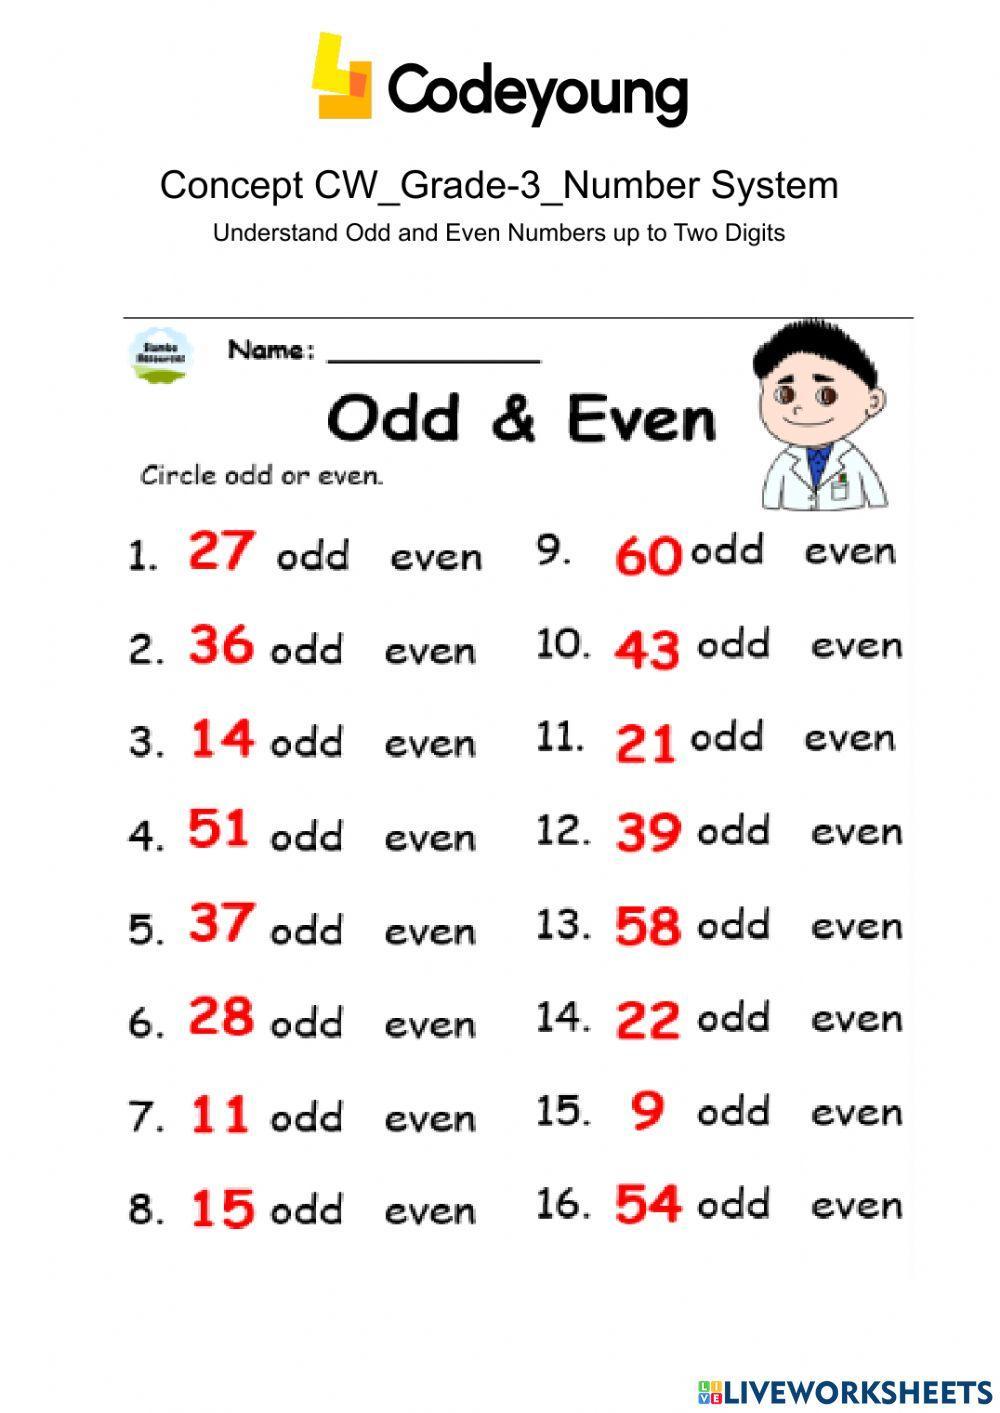 Odd even numbers